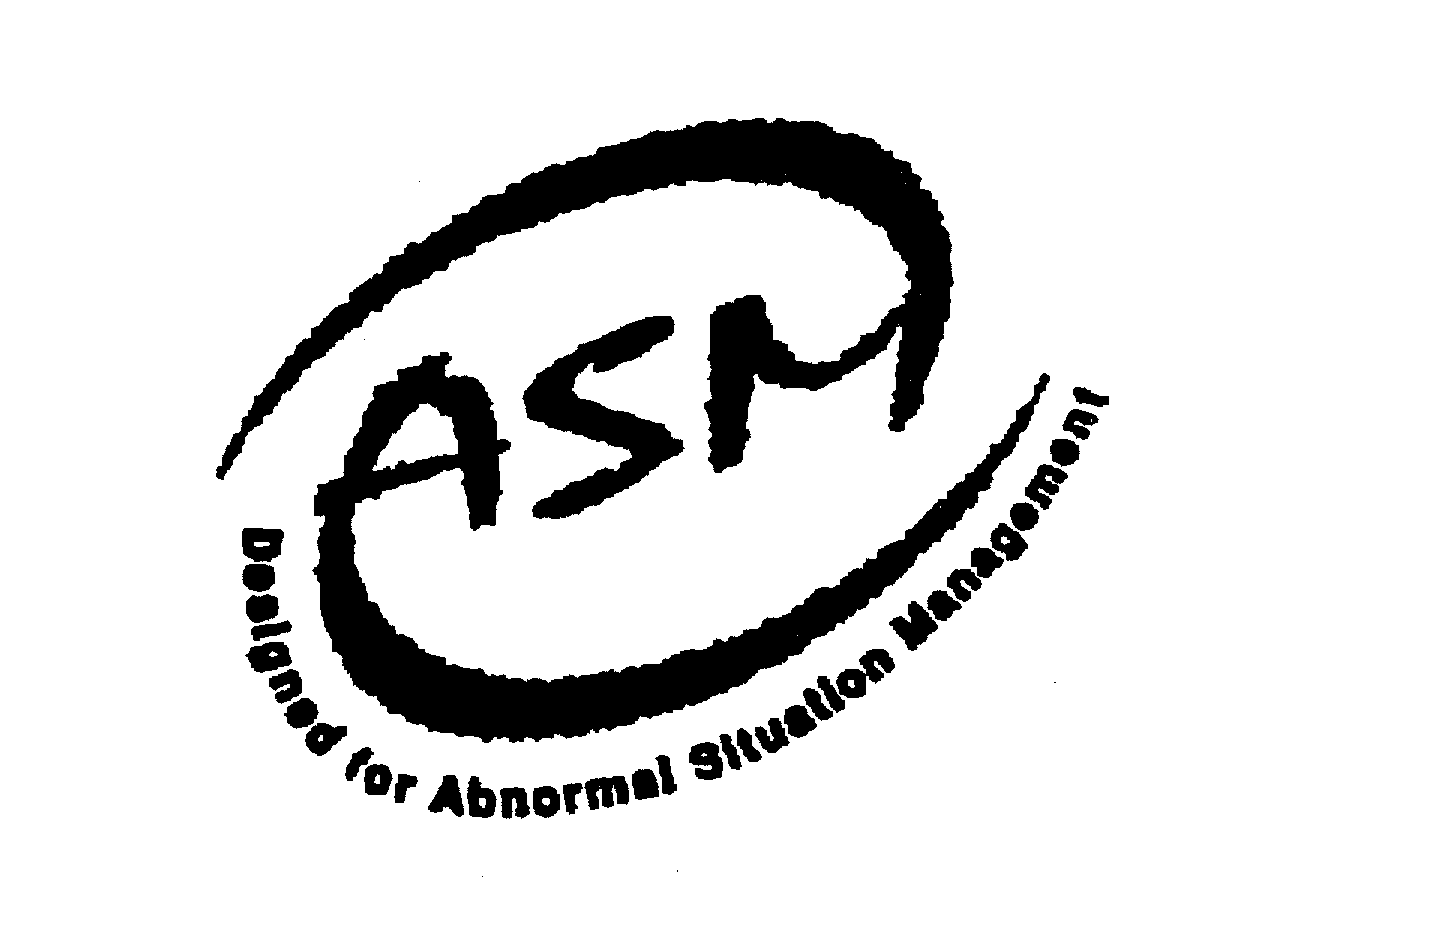  ASM DESIGNED FOR ABNORMAL SITUATION MANAGEMENT